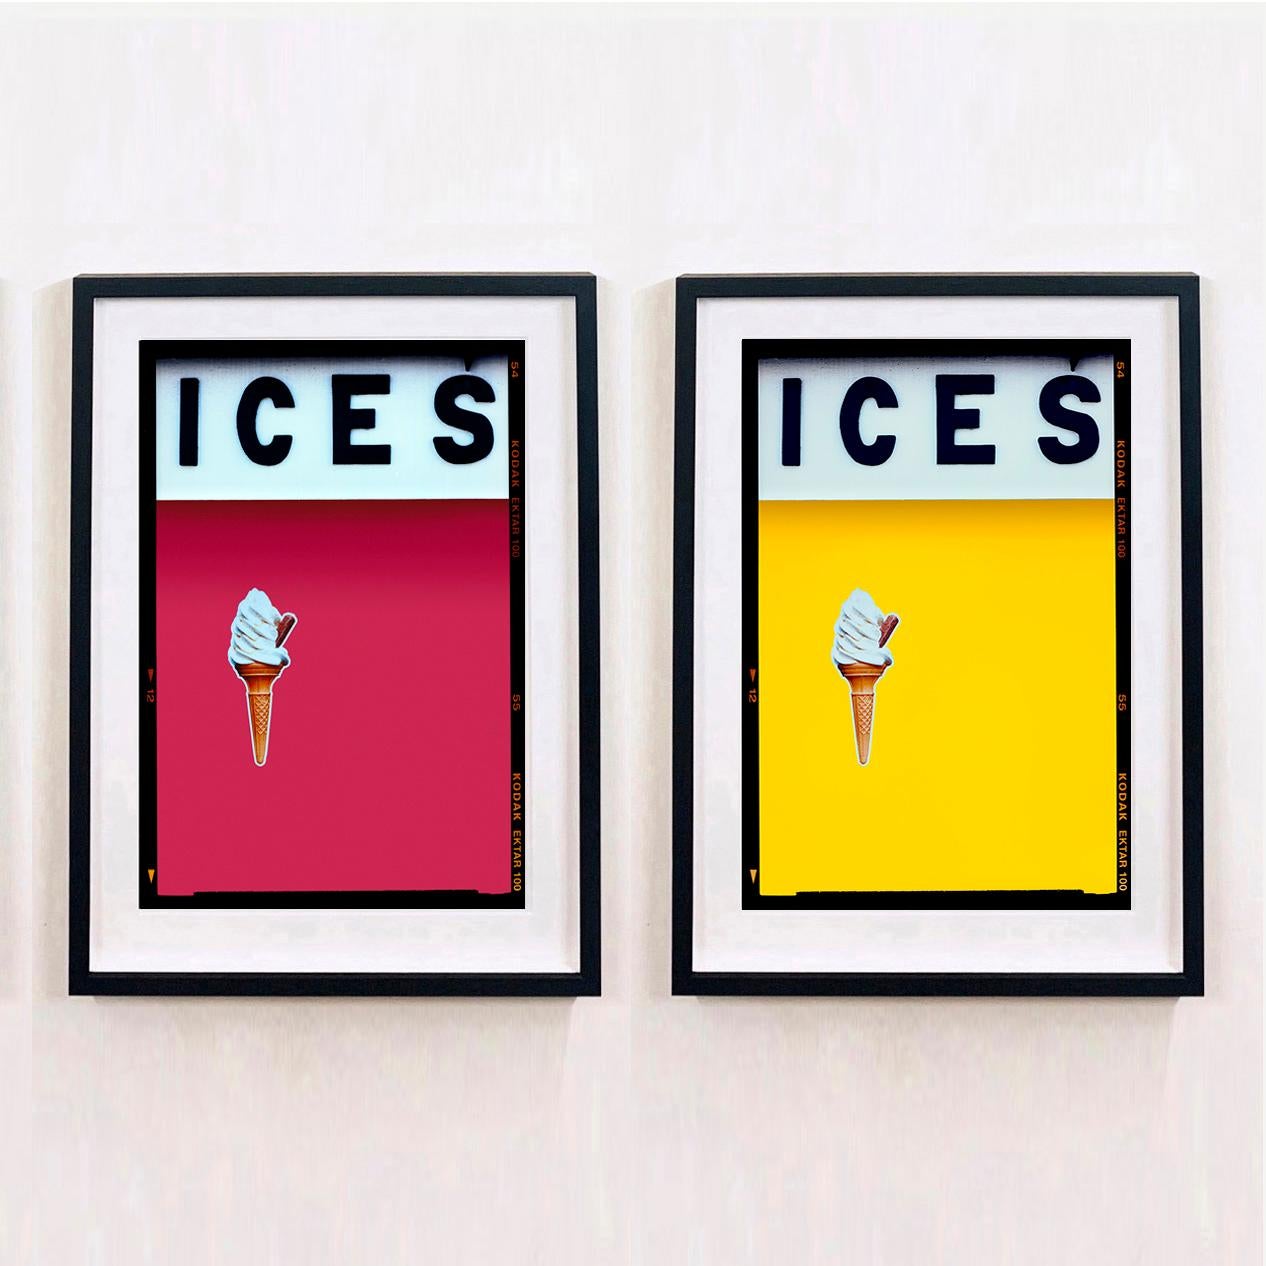 ICES - Two Framed Artworks, Photographs by Richard Heeps. Select your color pairing.

ICES, by Richard Heeps, photographed at the British Seaside at the end of summer 2020. This artwork is about evoking memories of the simple joy of days by the